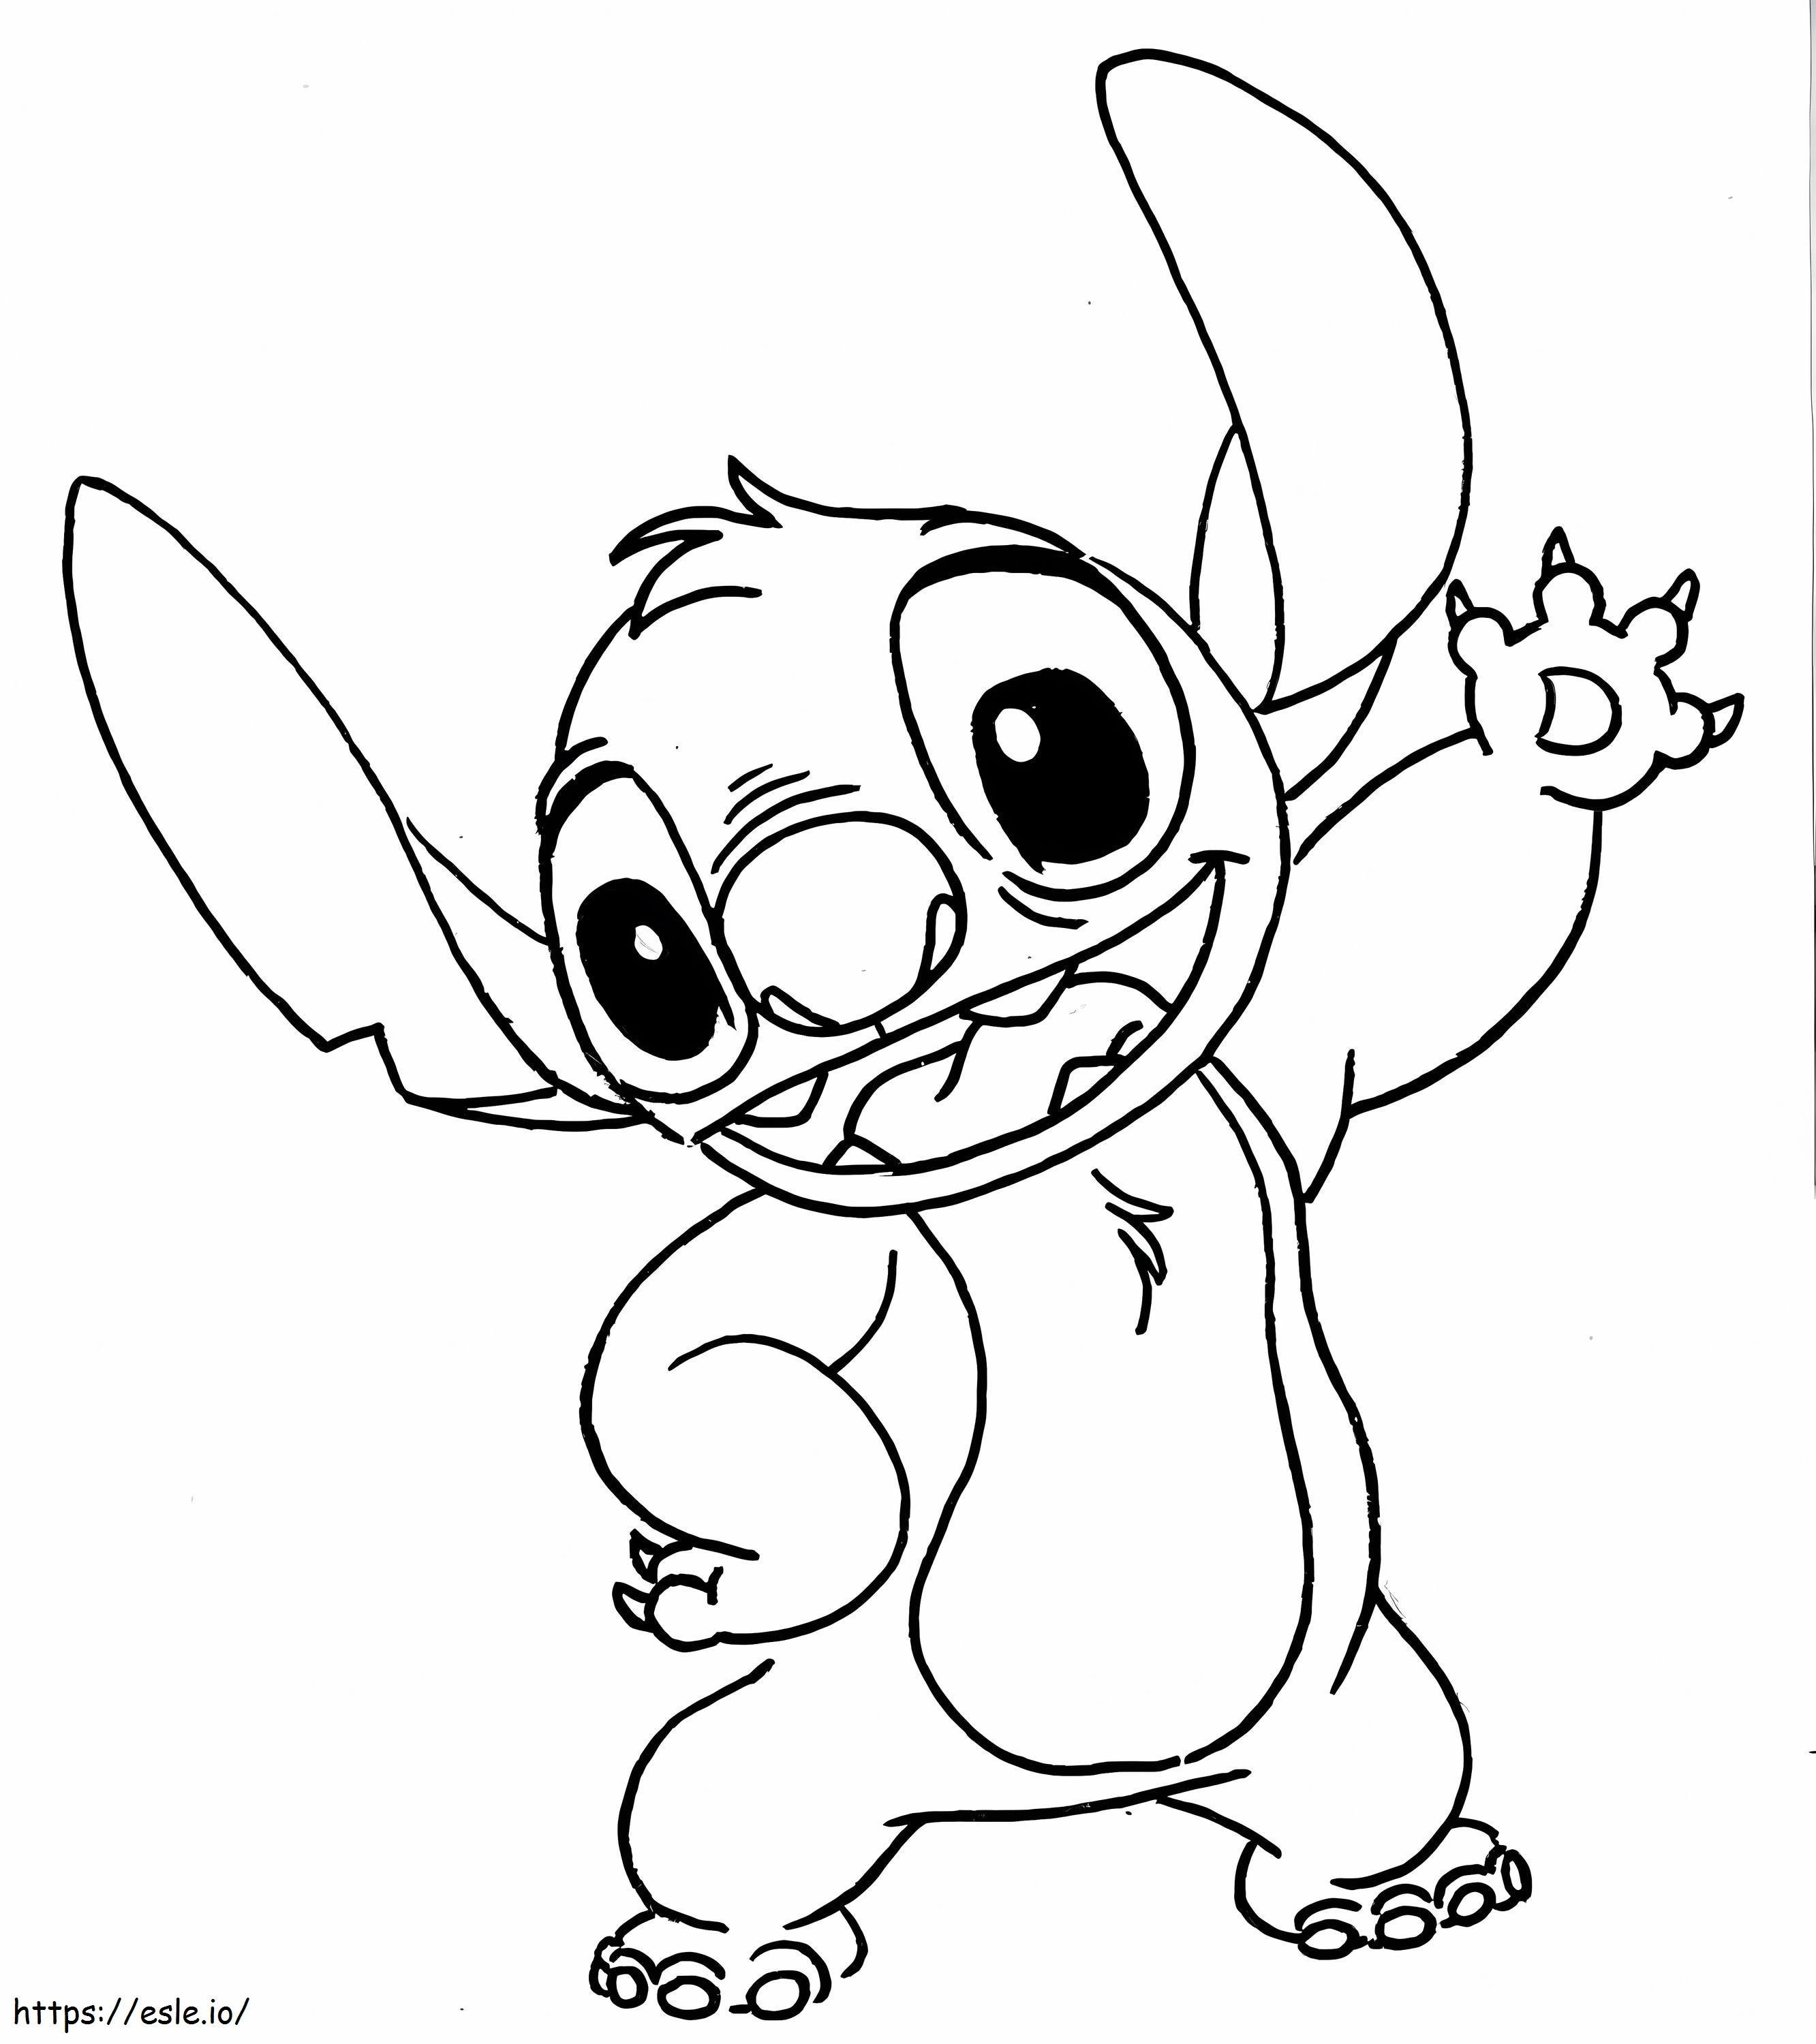 Stitch Normal coloring page